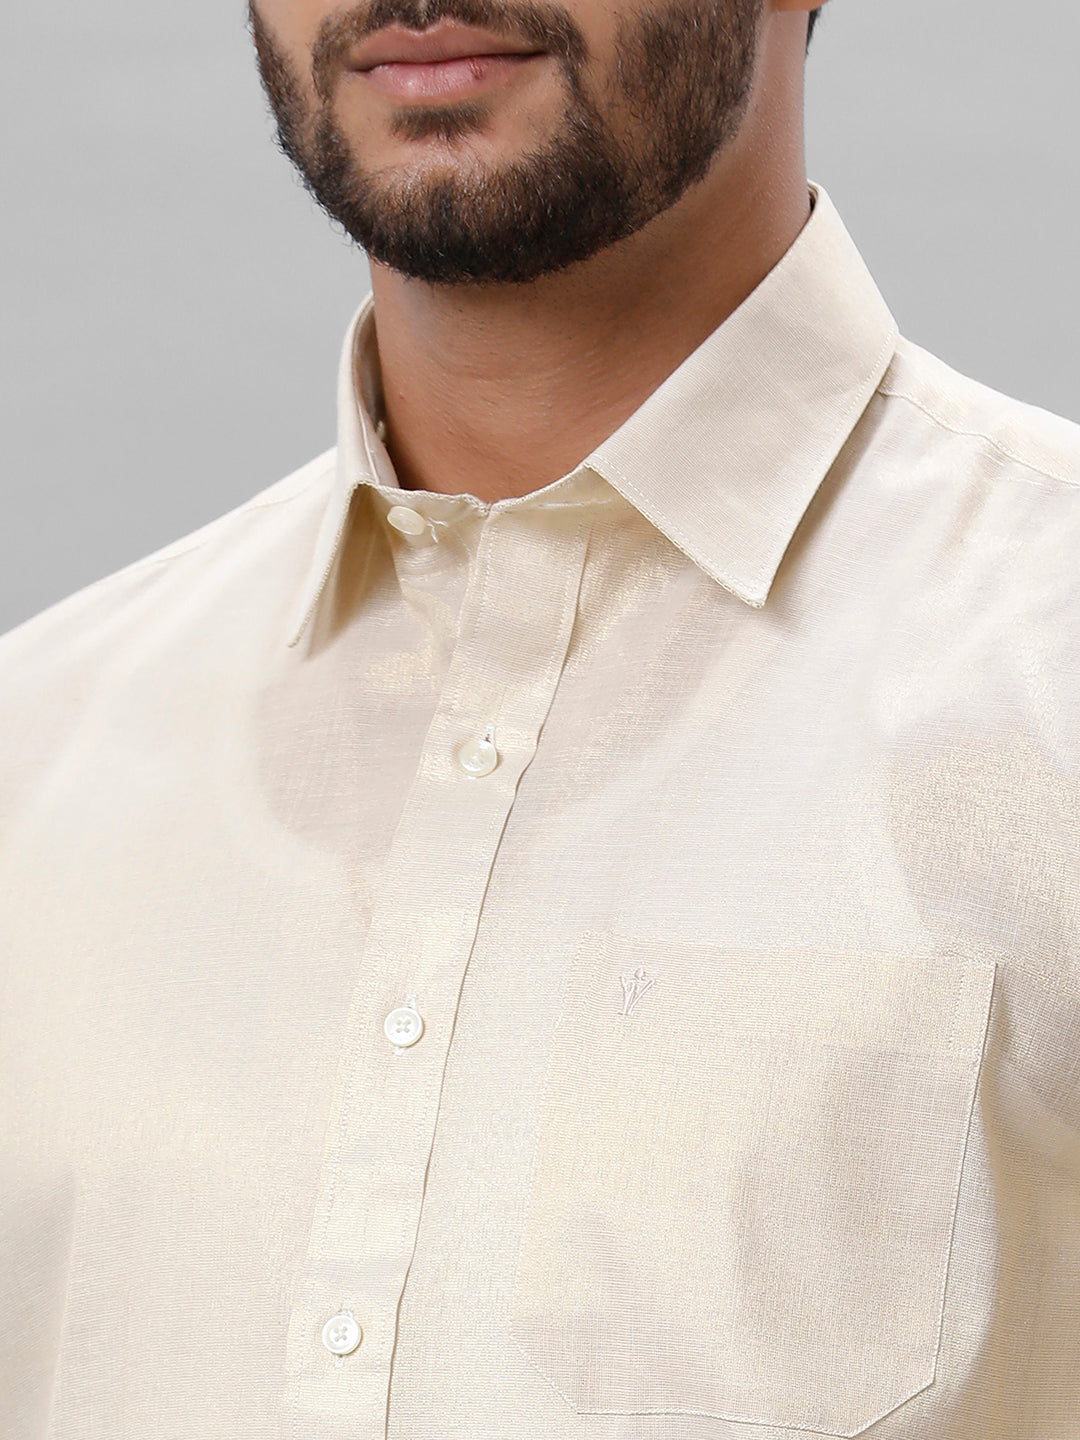 Mens Gold Tissue Half Sleeve Shirt with Matching Readymade Single Dhoti Combo